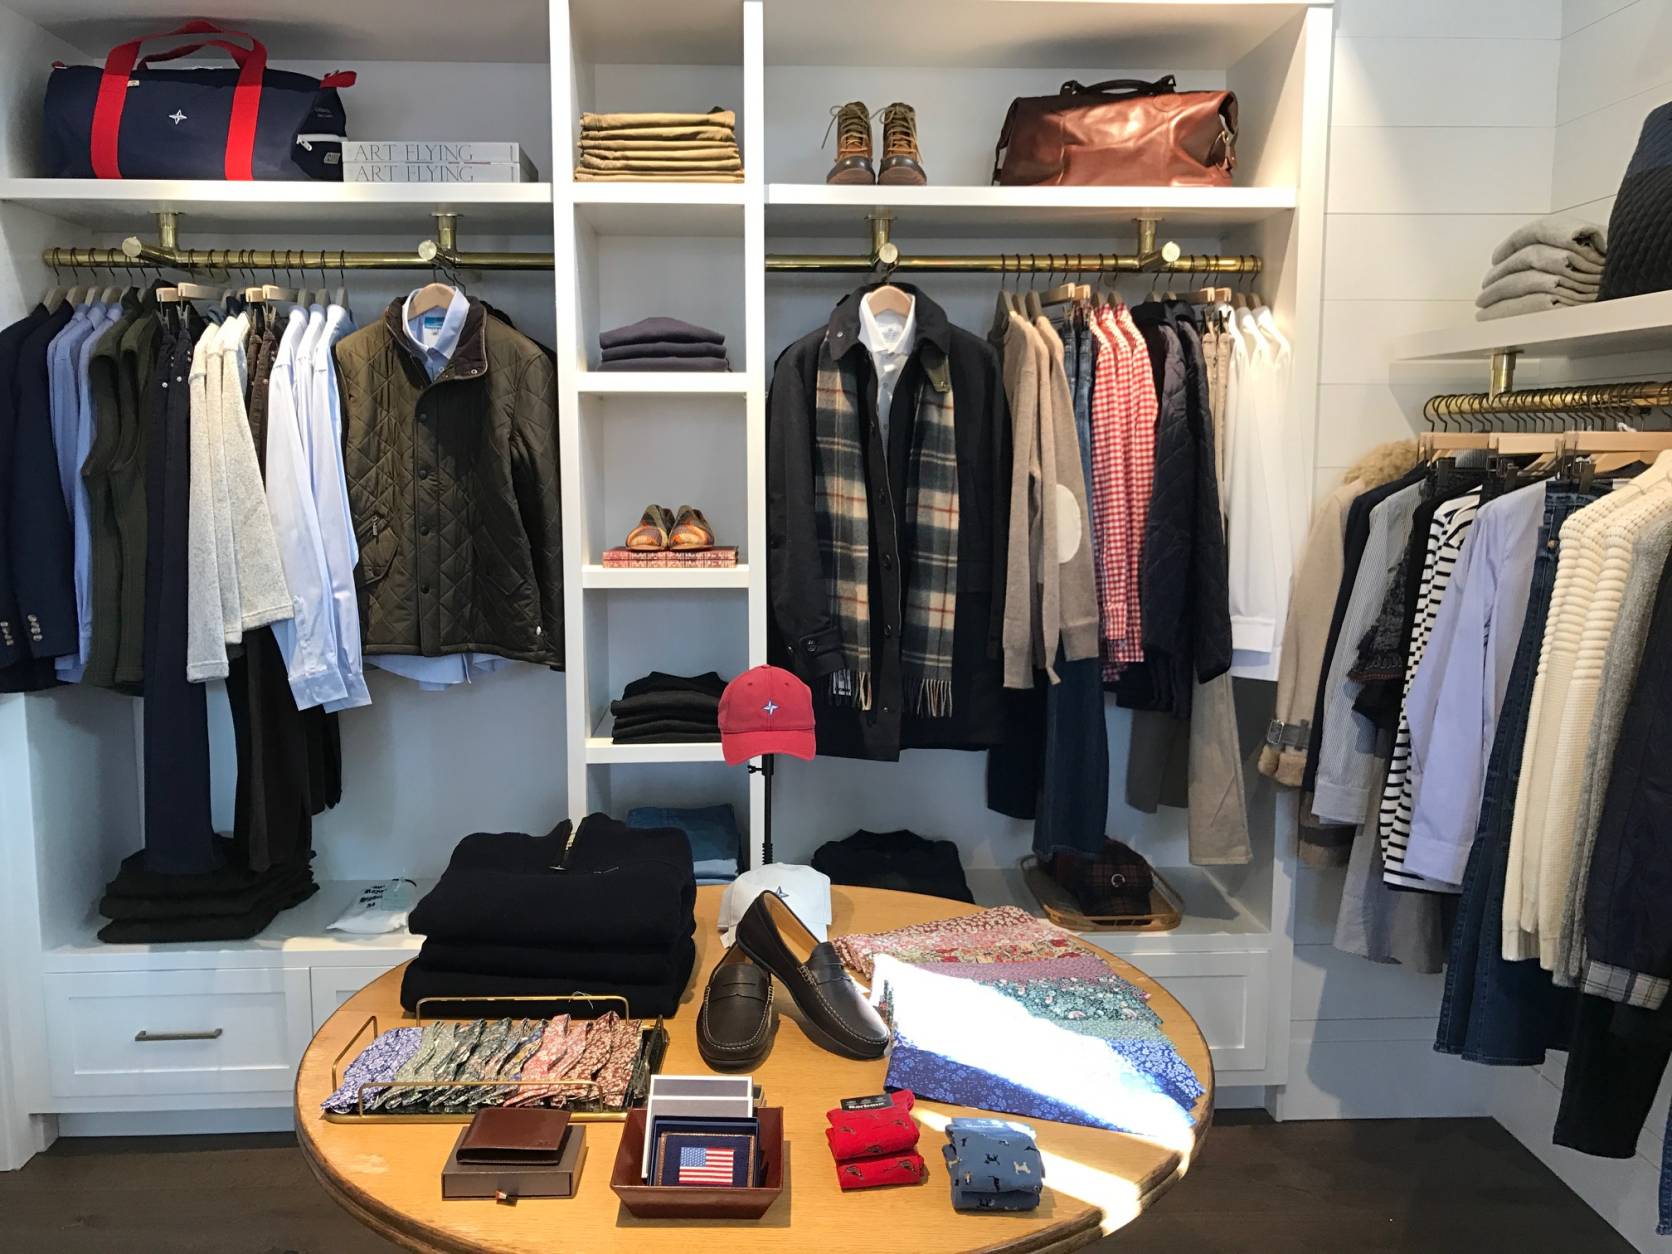 Tuckernuck, which launched its online clothing and lifestyle store in 2012, just opened its first brick-and-mortar location at 1053 Wisconsin Ave. in Georgetown. (WTOP/Rachel Nania) 